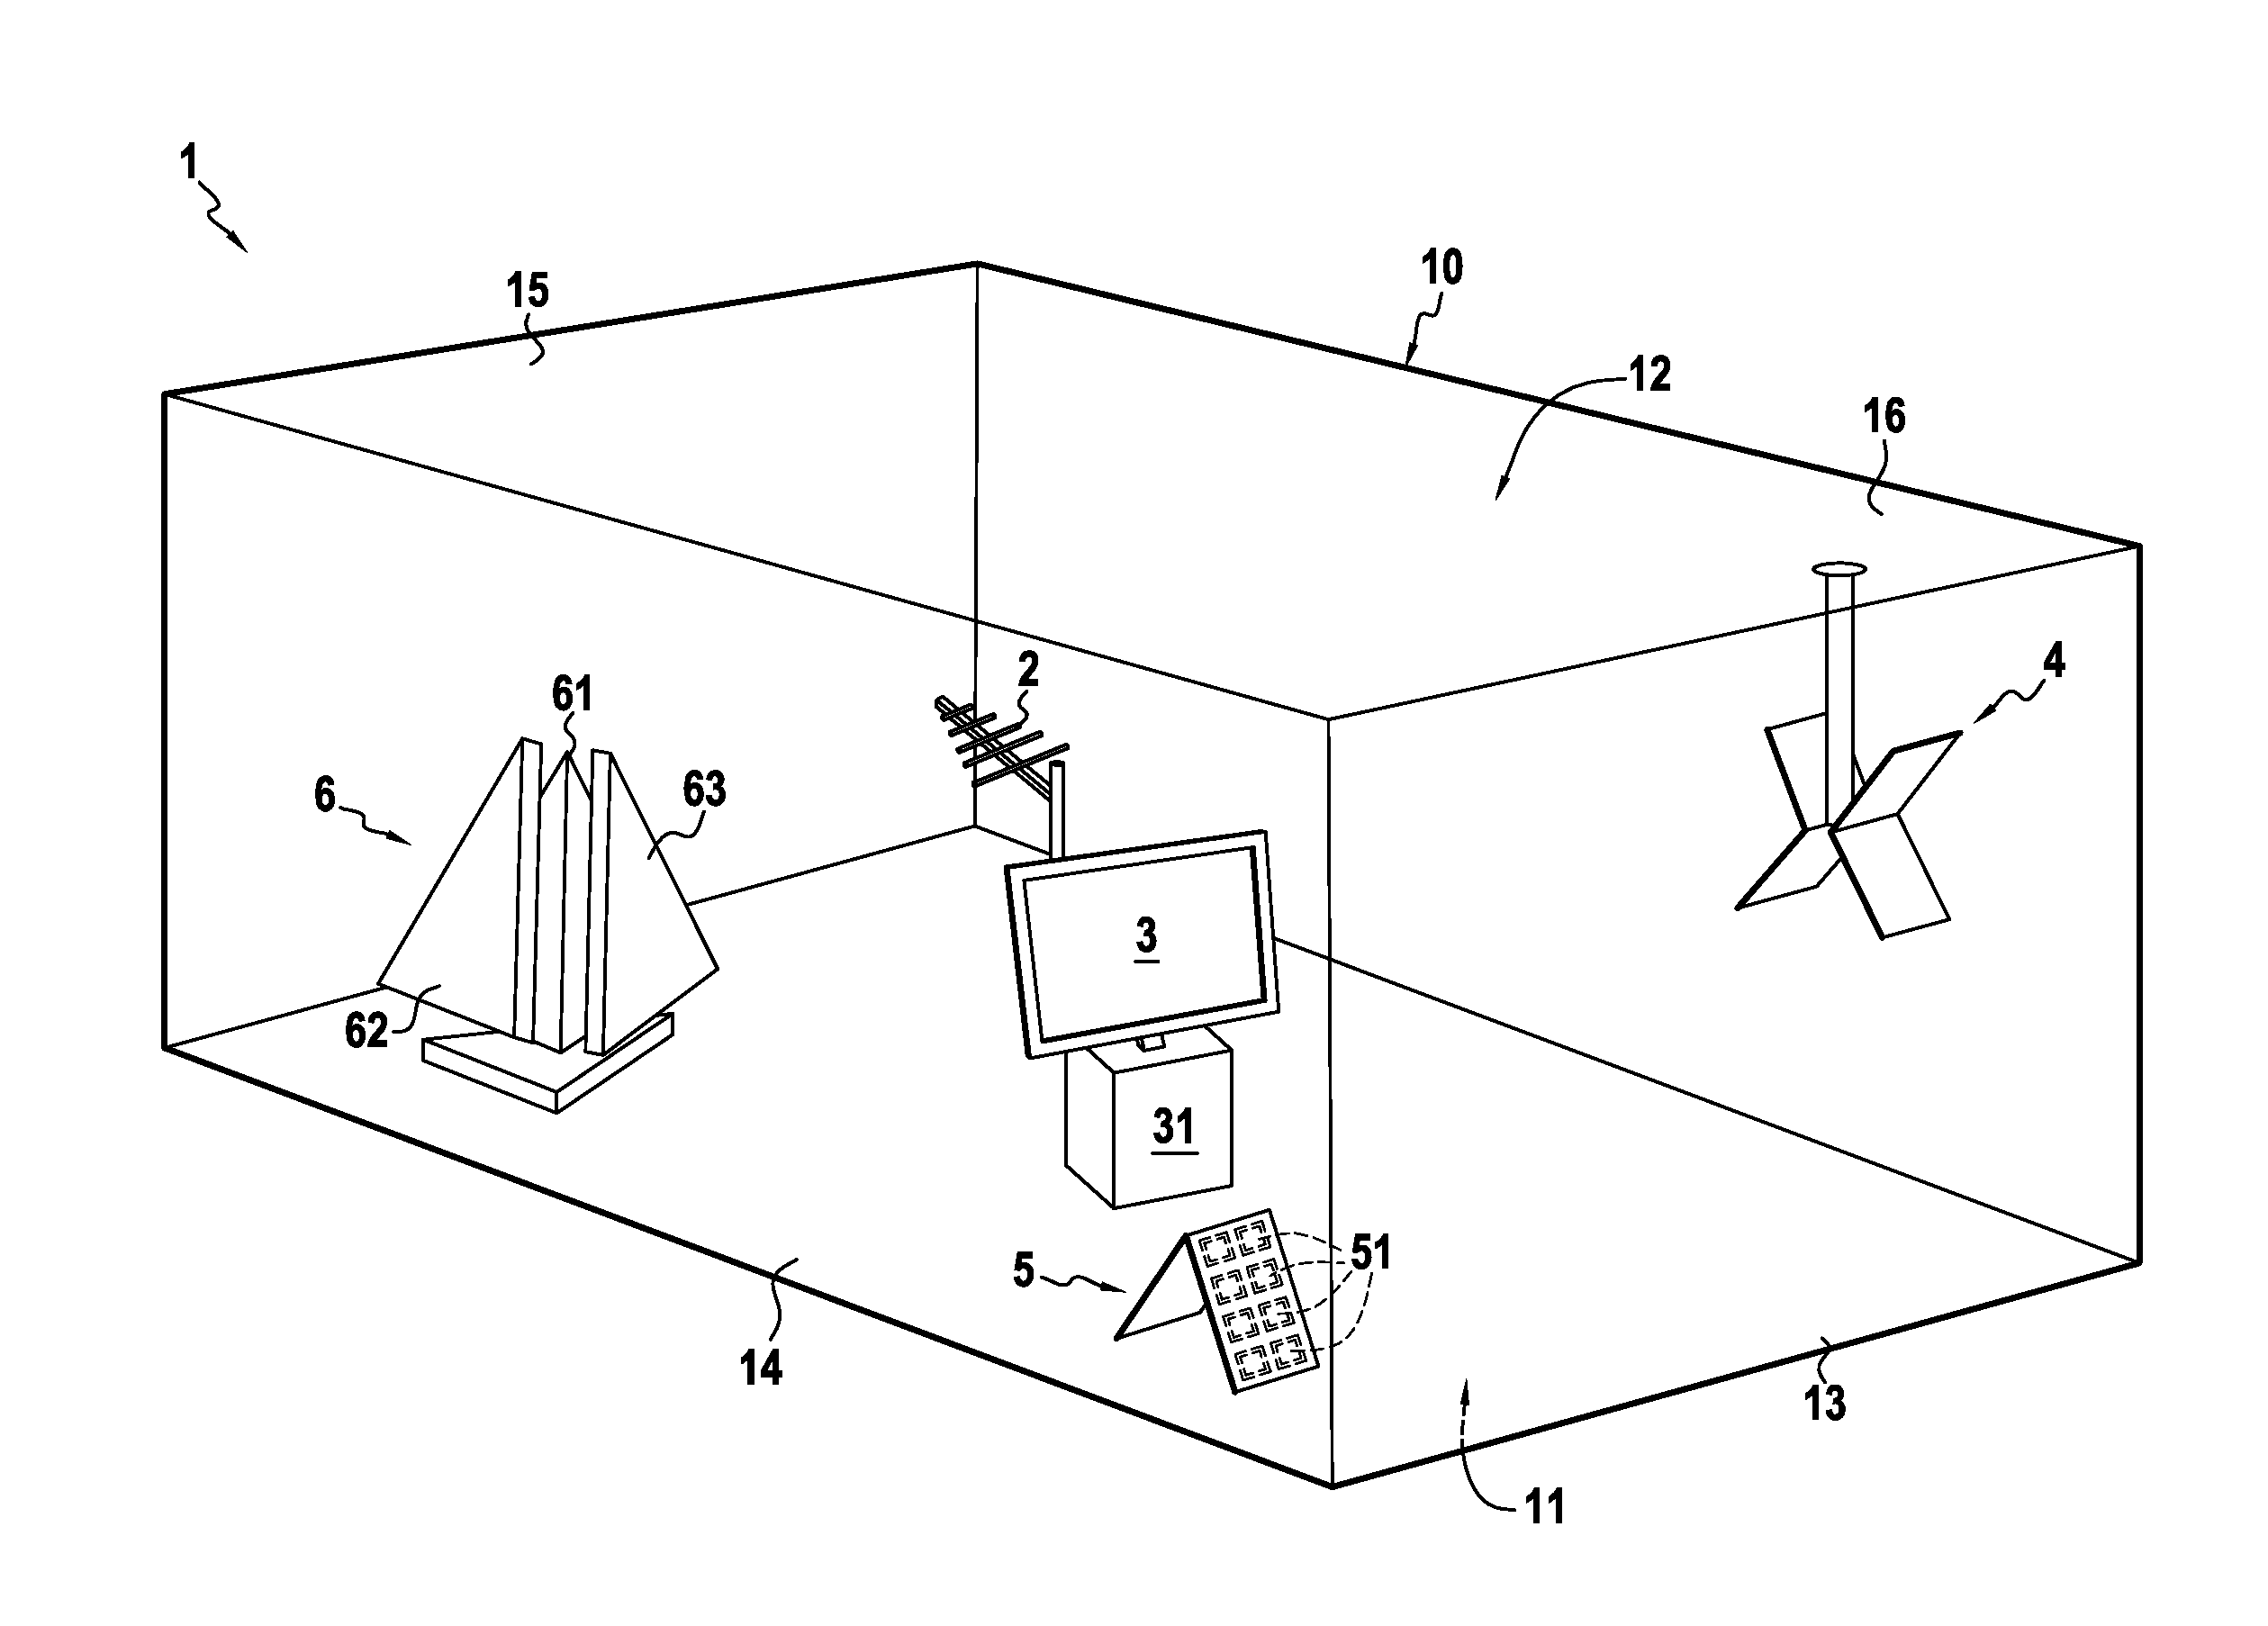 Reverberation chamber with improved electromagnetic field uniformity